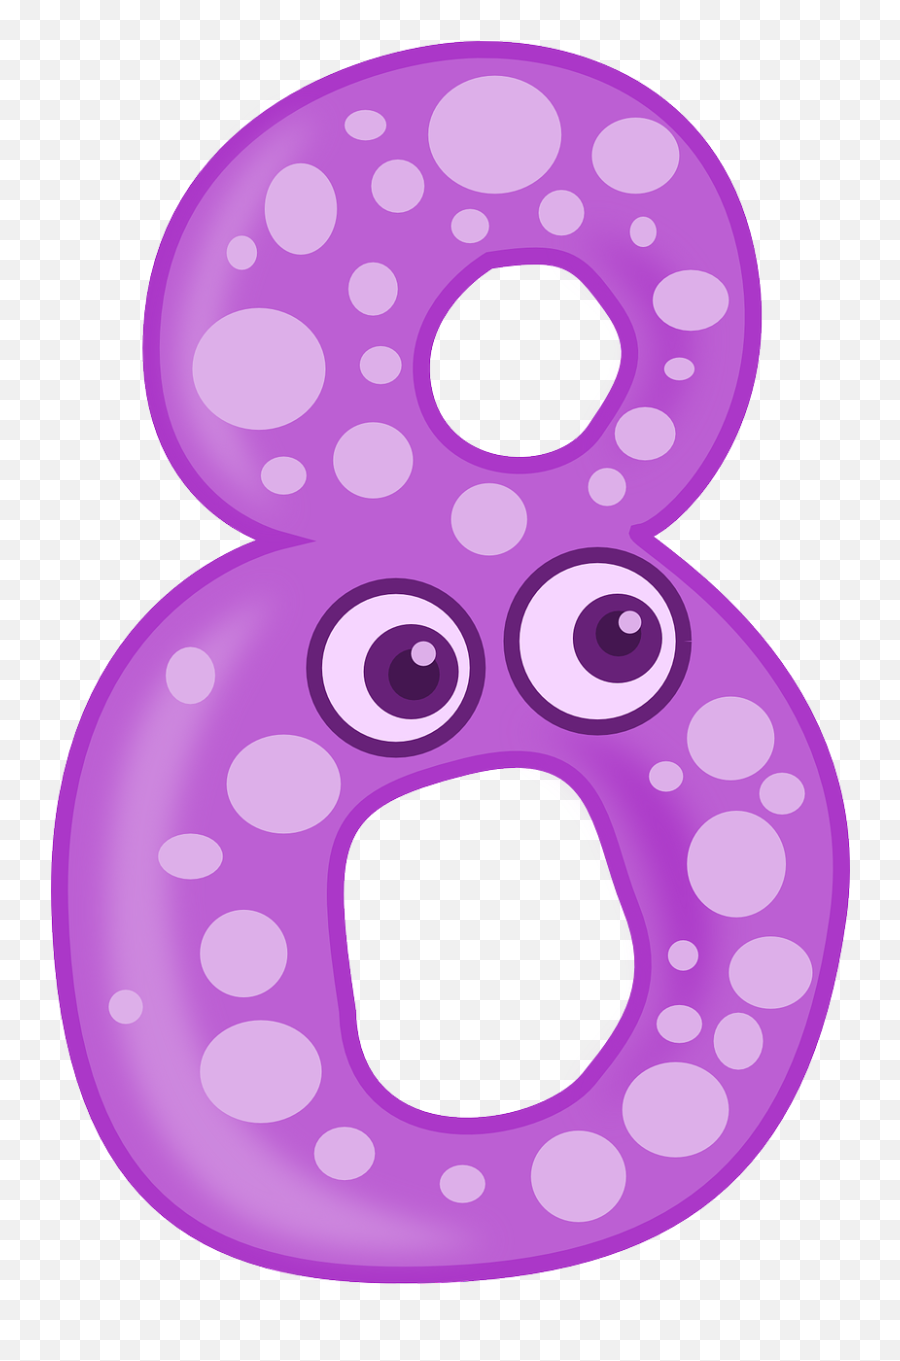 Counting Eight Math Numbers Numerals - Number 8 Clipart Emoji,Roman Numerals Emoji